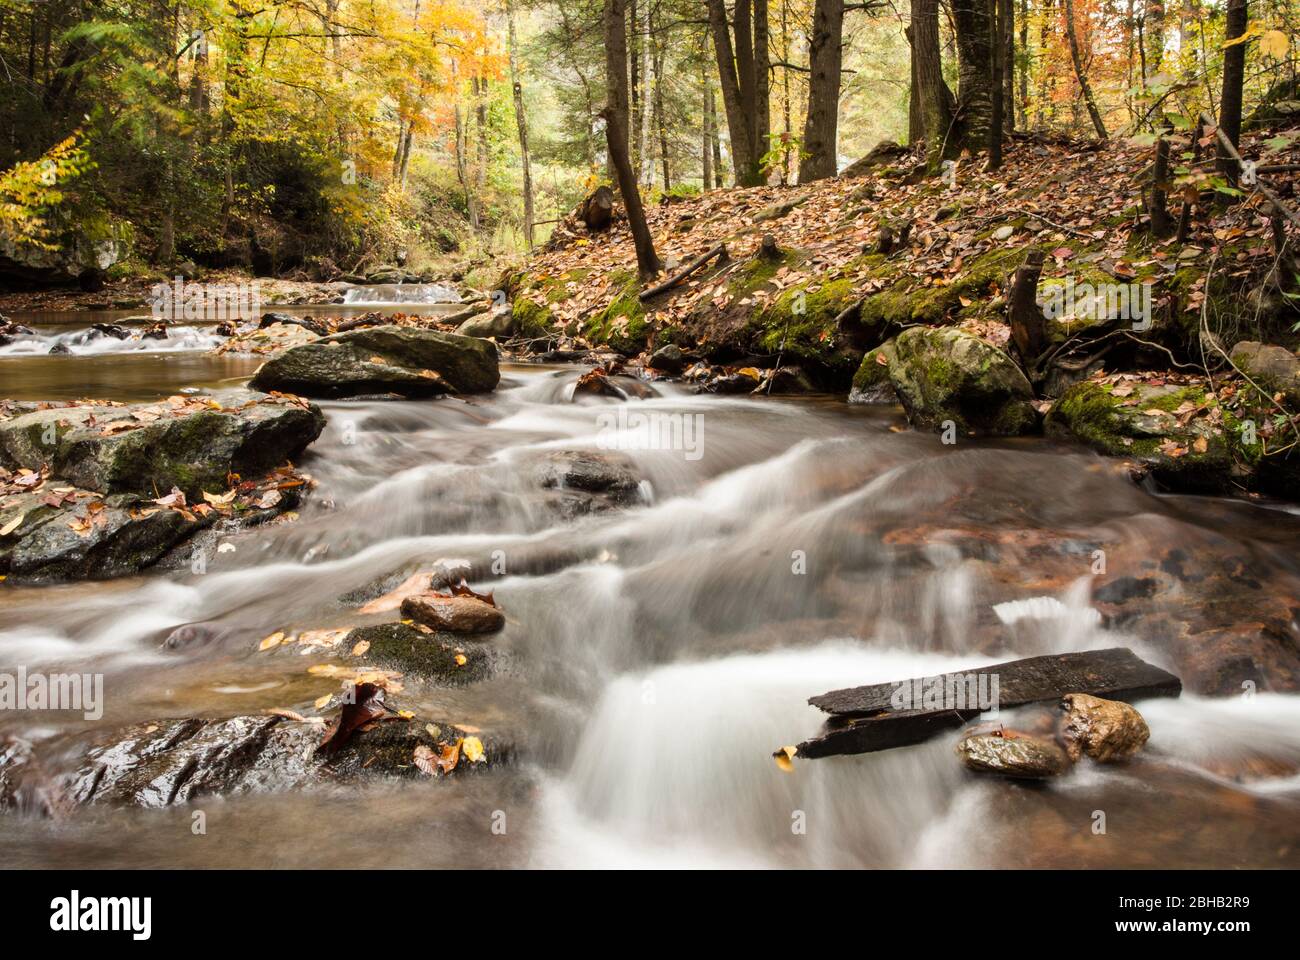 Swiftly flowing creek surrounded by a forest of fall color Stock Photo